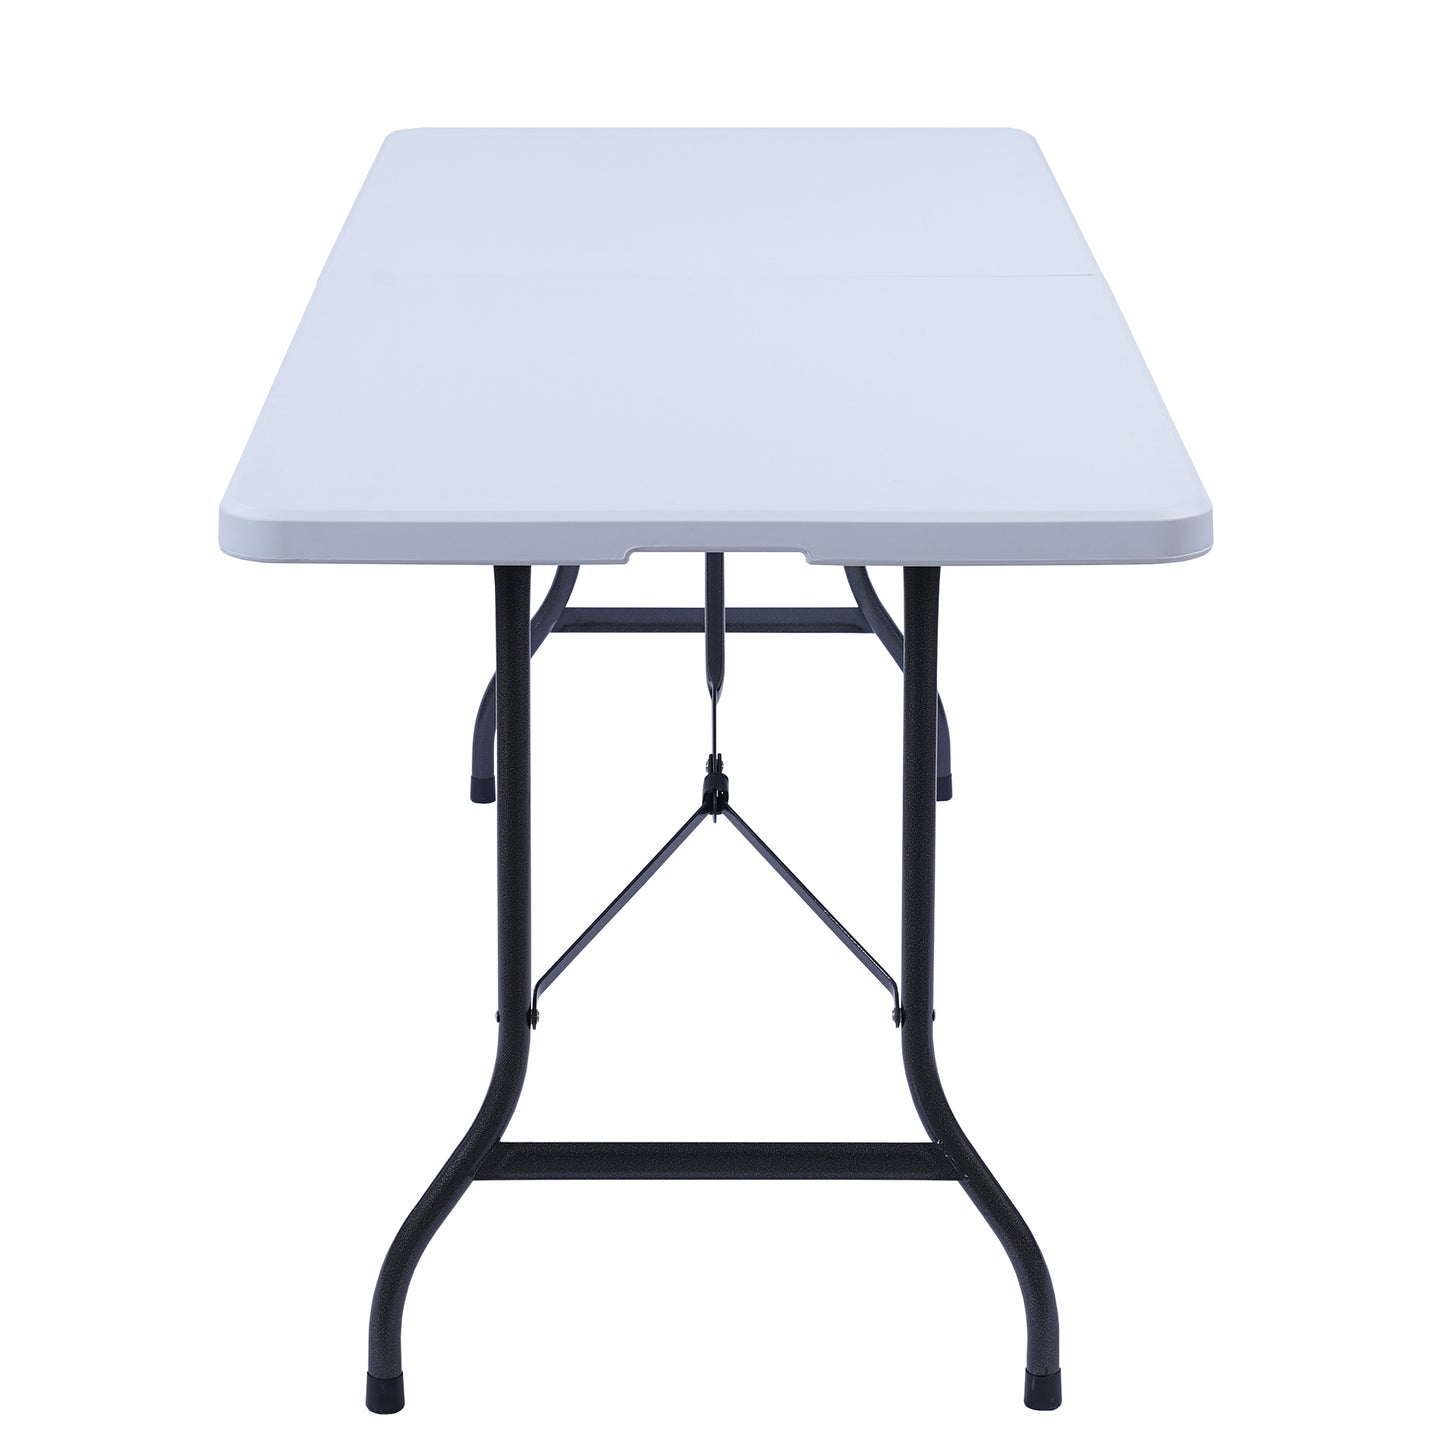 6 Ft Portable Folding Table, Fold-in-Half Plastic Card Table Dinging Table for Camping, Picnic, Kitchen or Outdoor Party Wedding Event